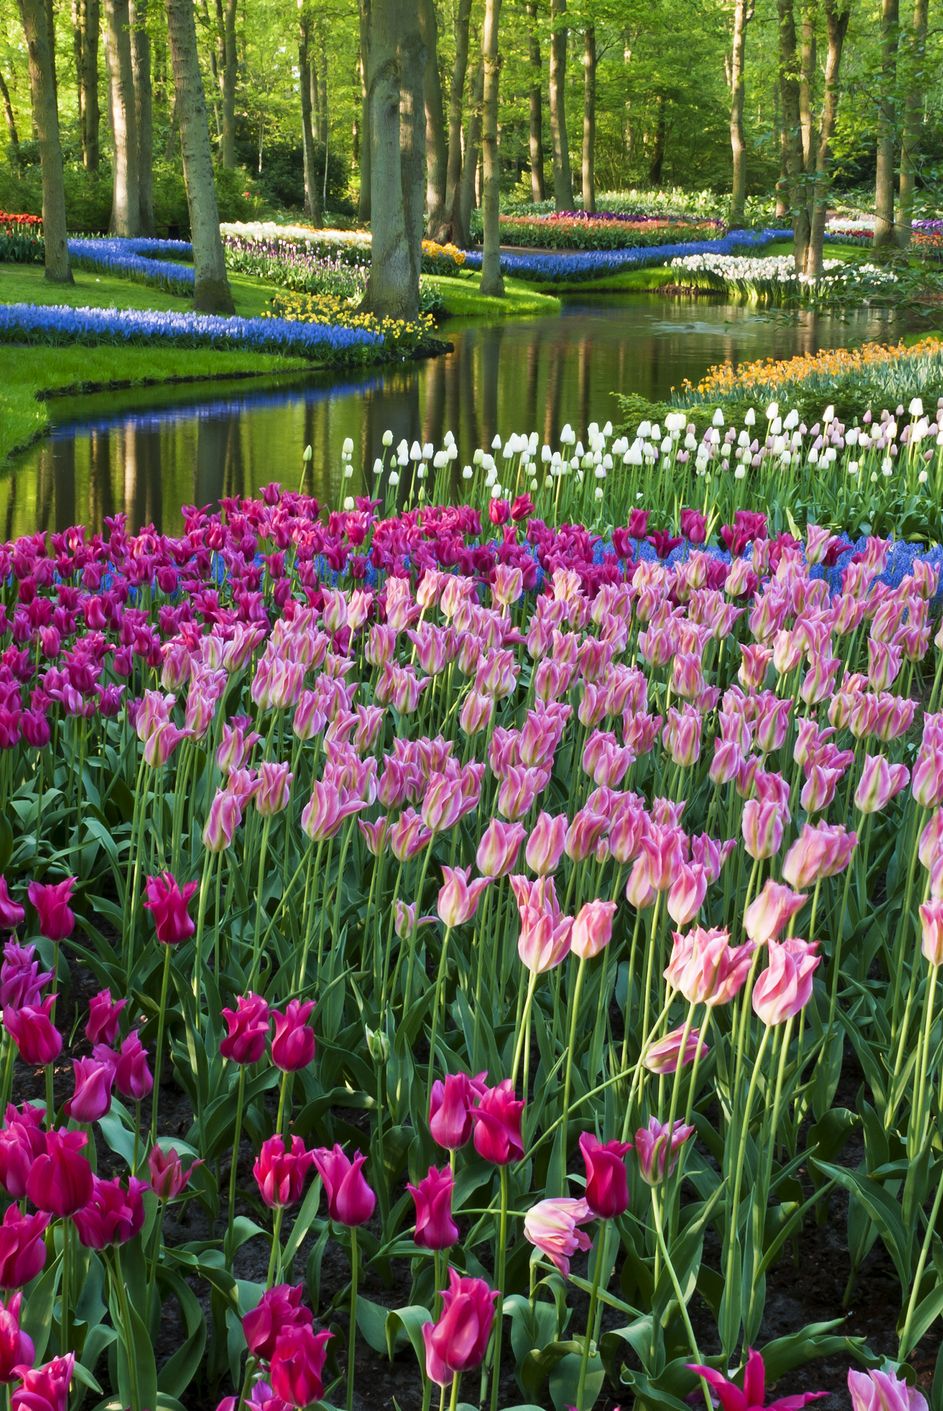 park with multi colored spring flowers along a pond location is the keukenhof garden, netherlandsother tulip images